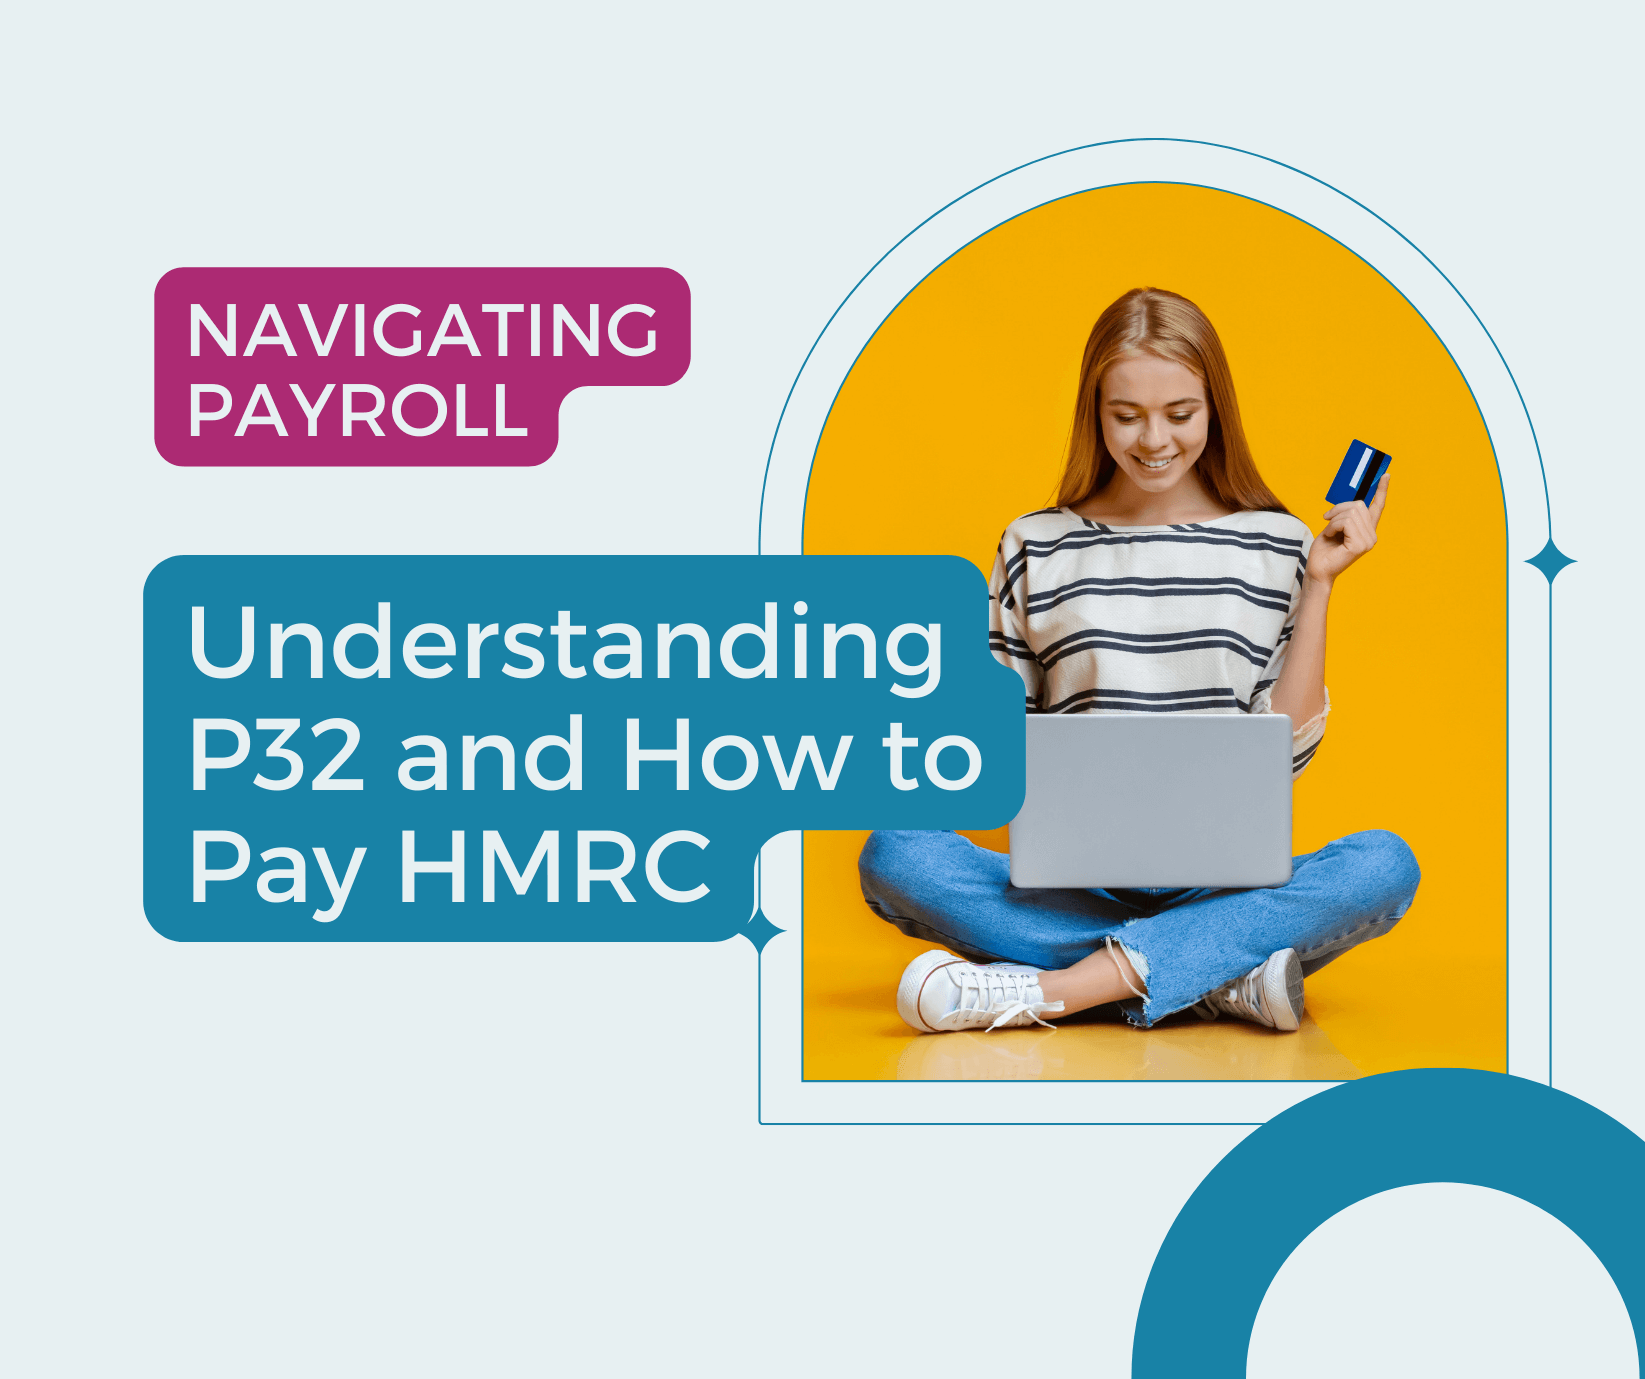 Navigating Payroll: Understanding P32 and How to Pay HMRC